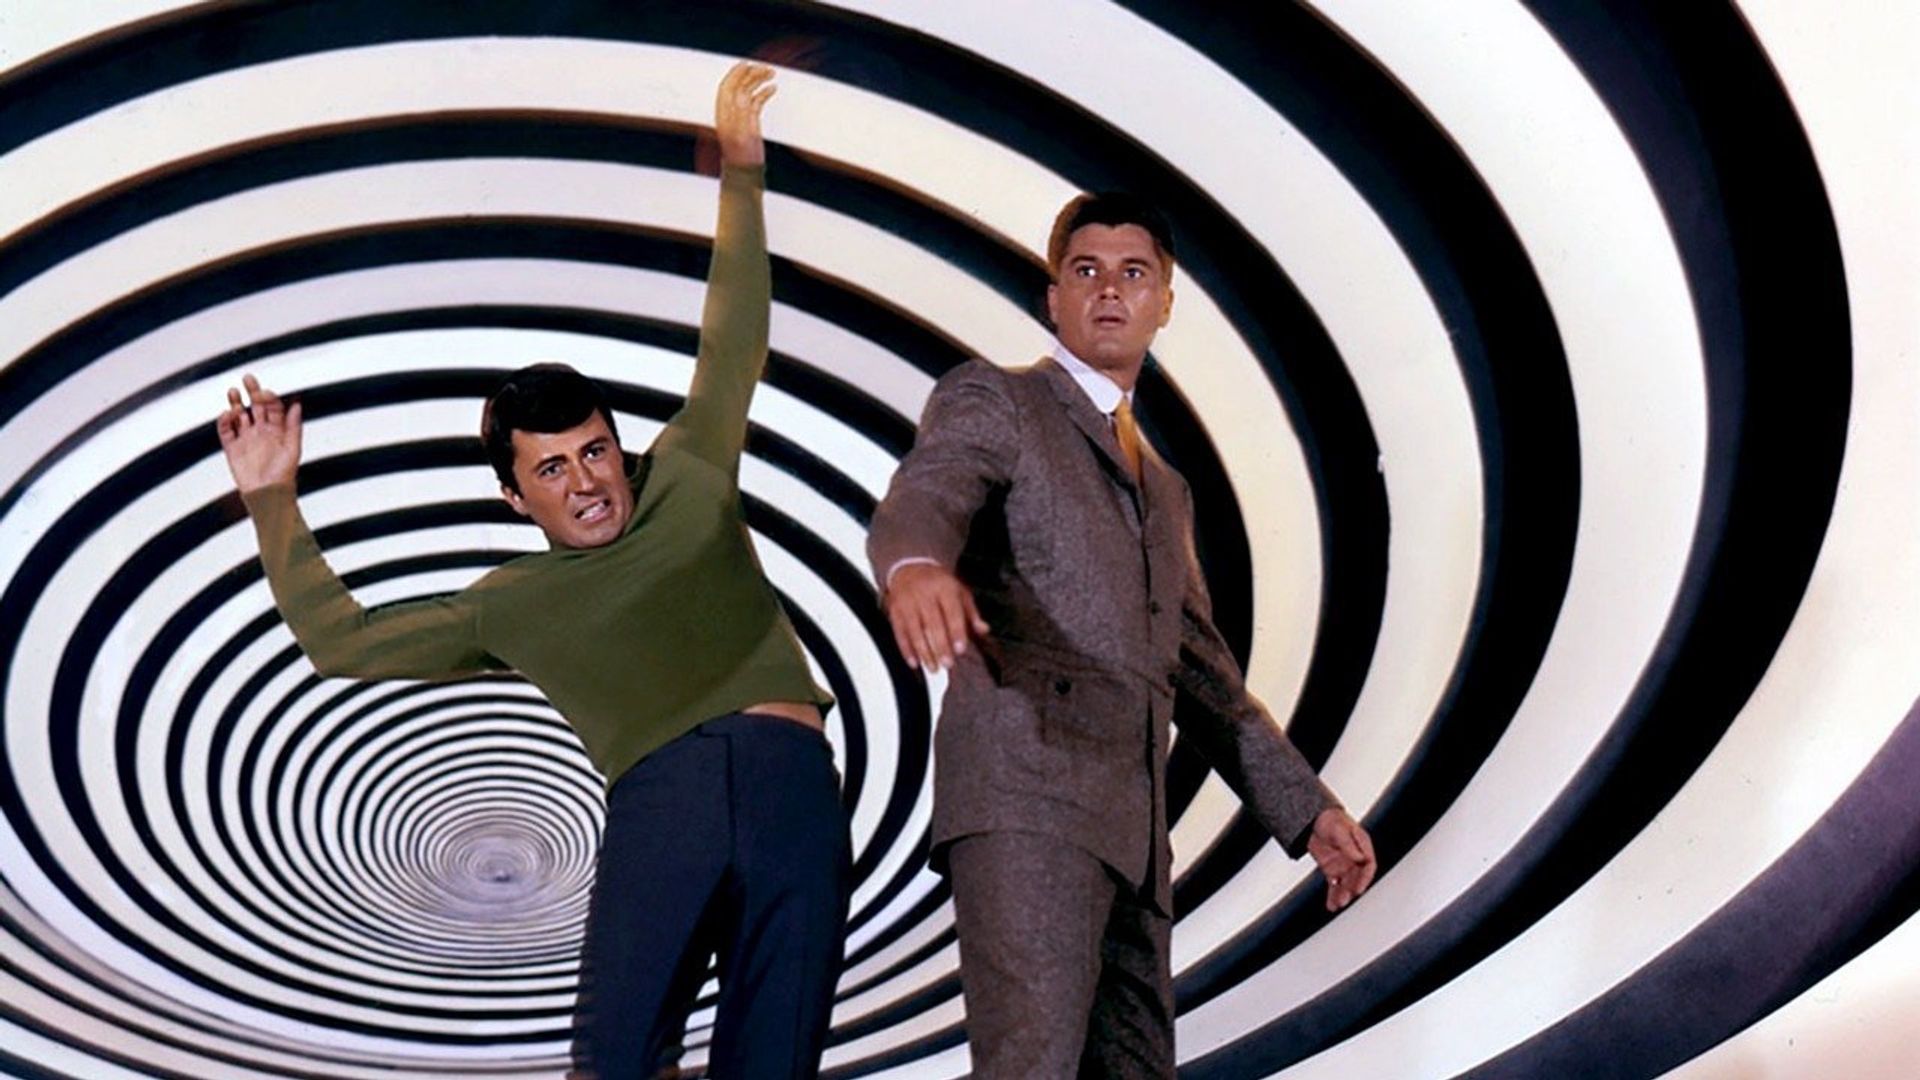 The Time Tunnel Backdrop